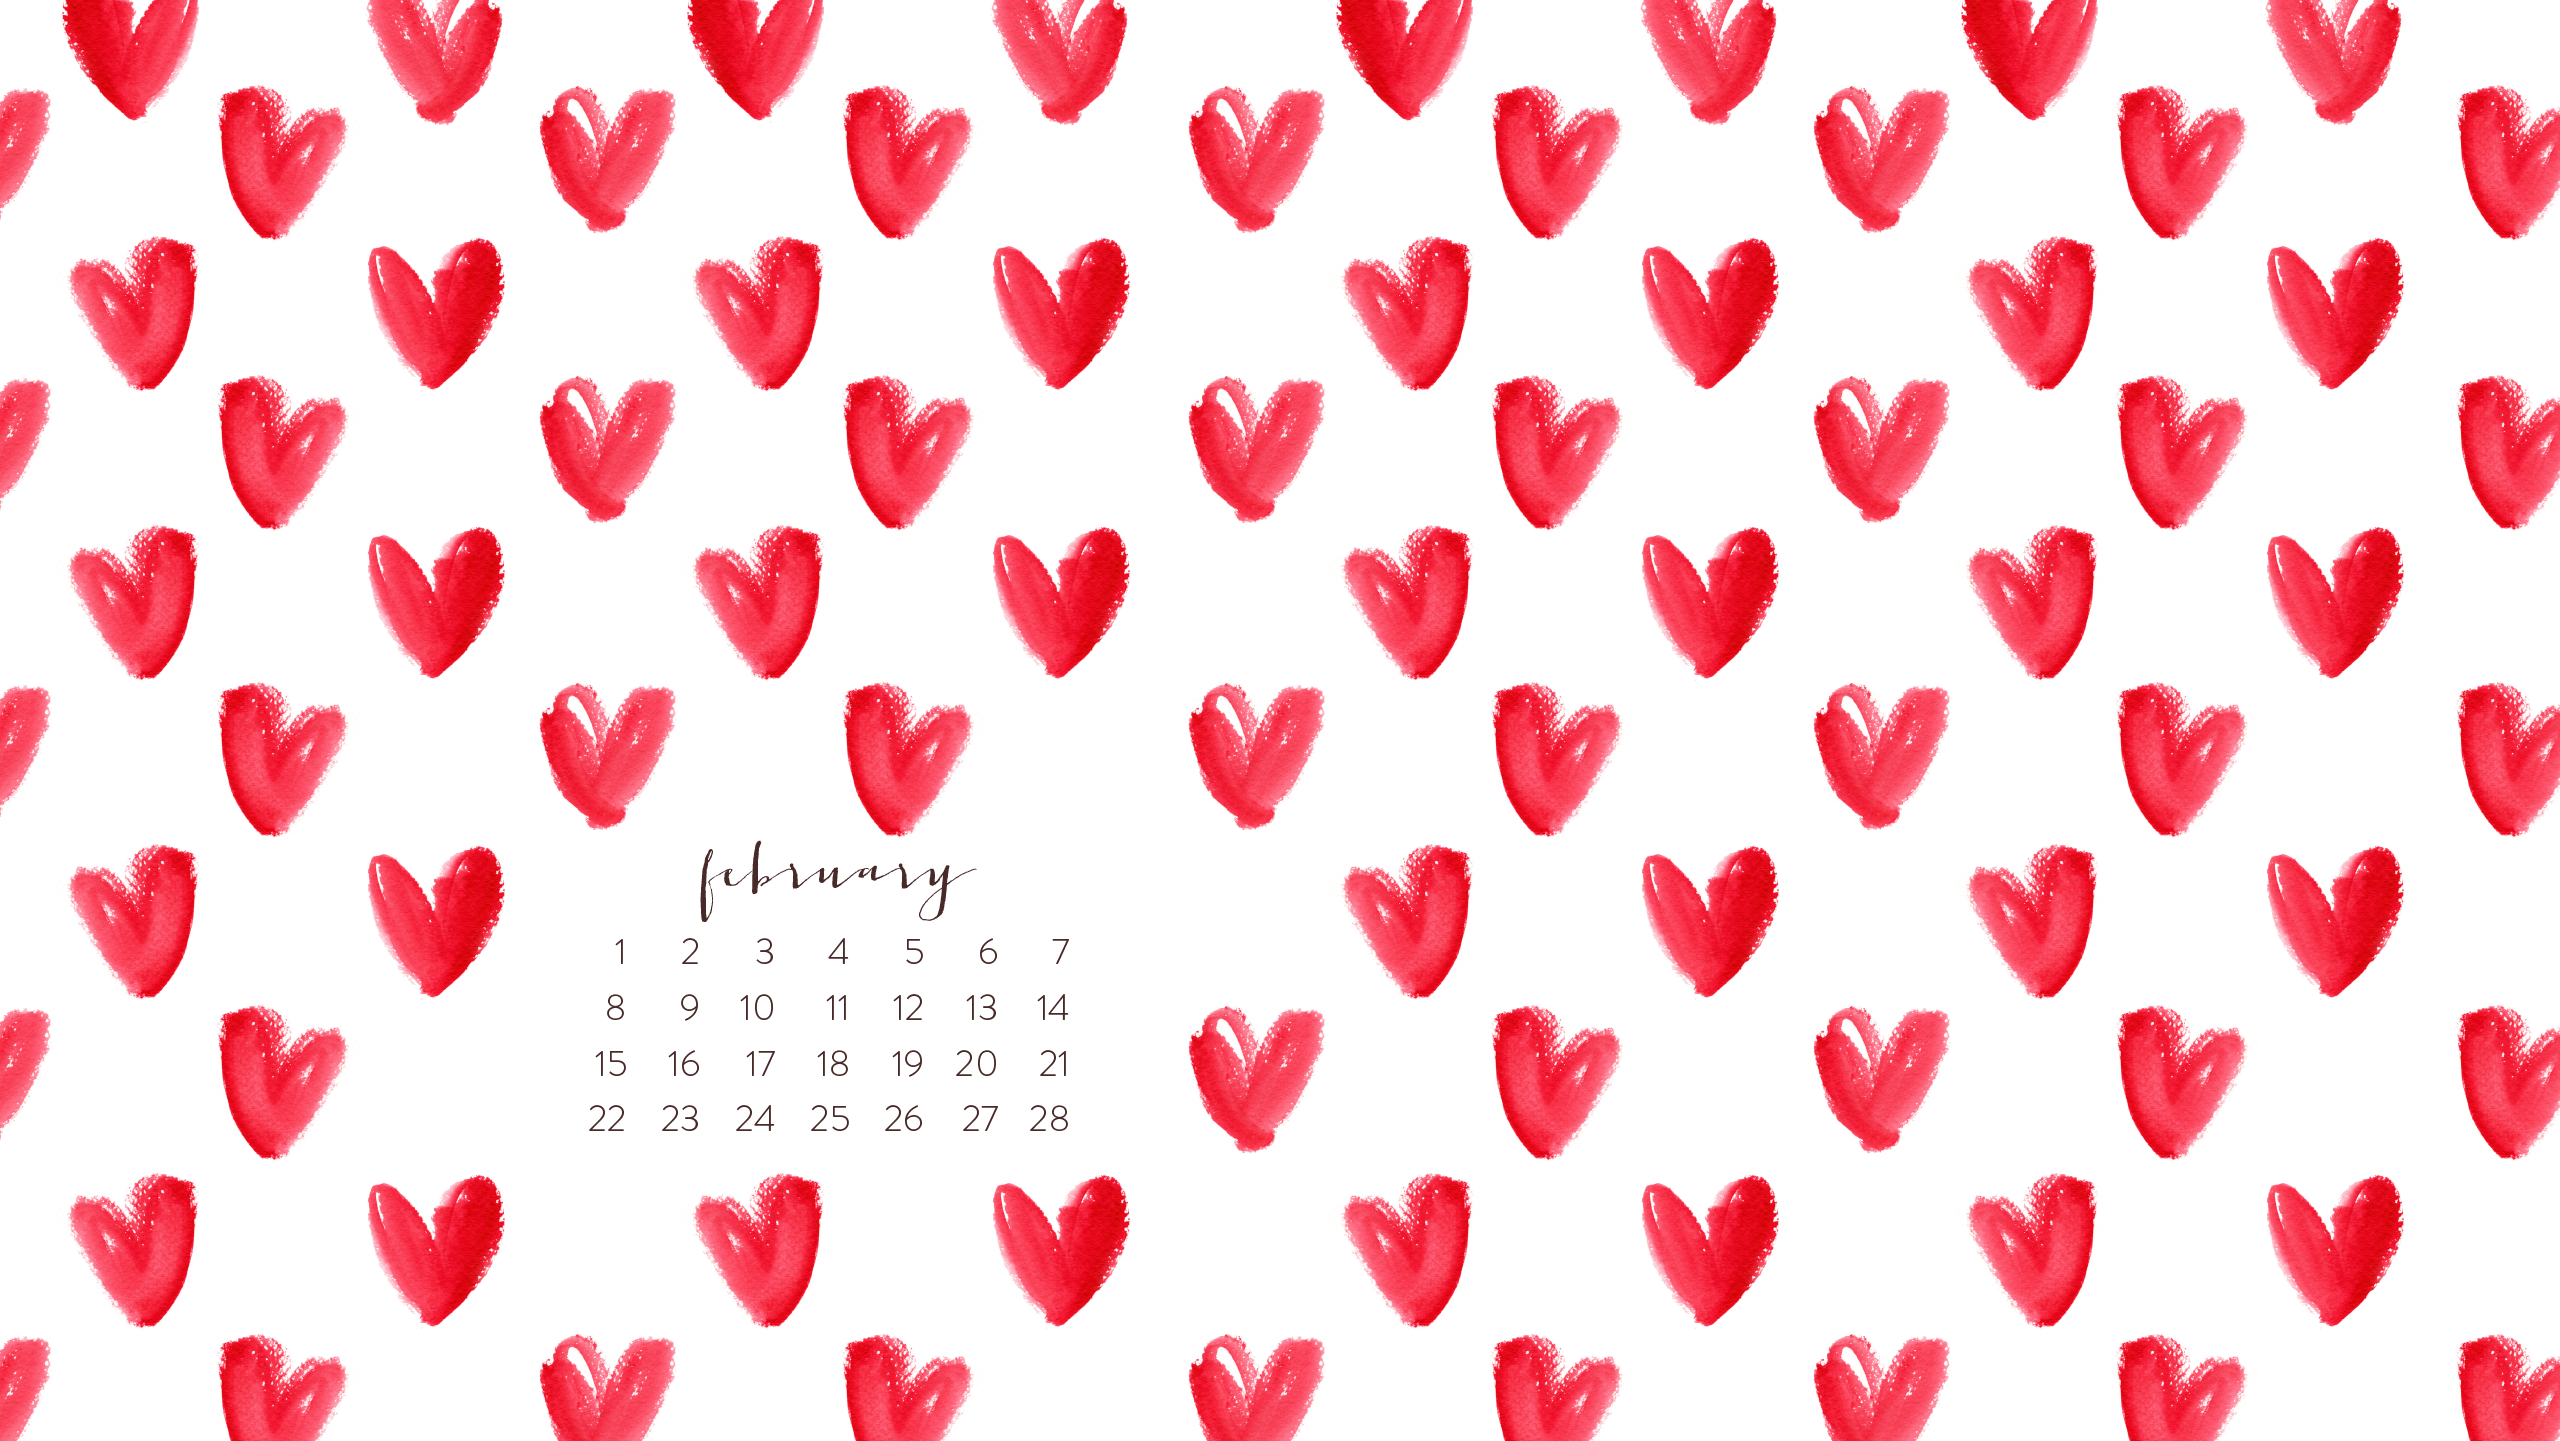 February 2015 Free Wallpapers are Here and We Nicoles Classes